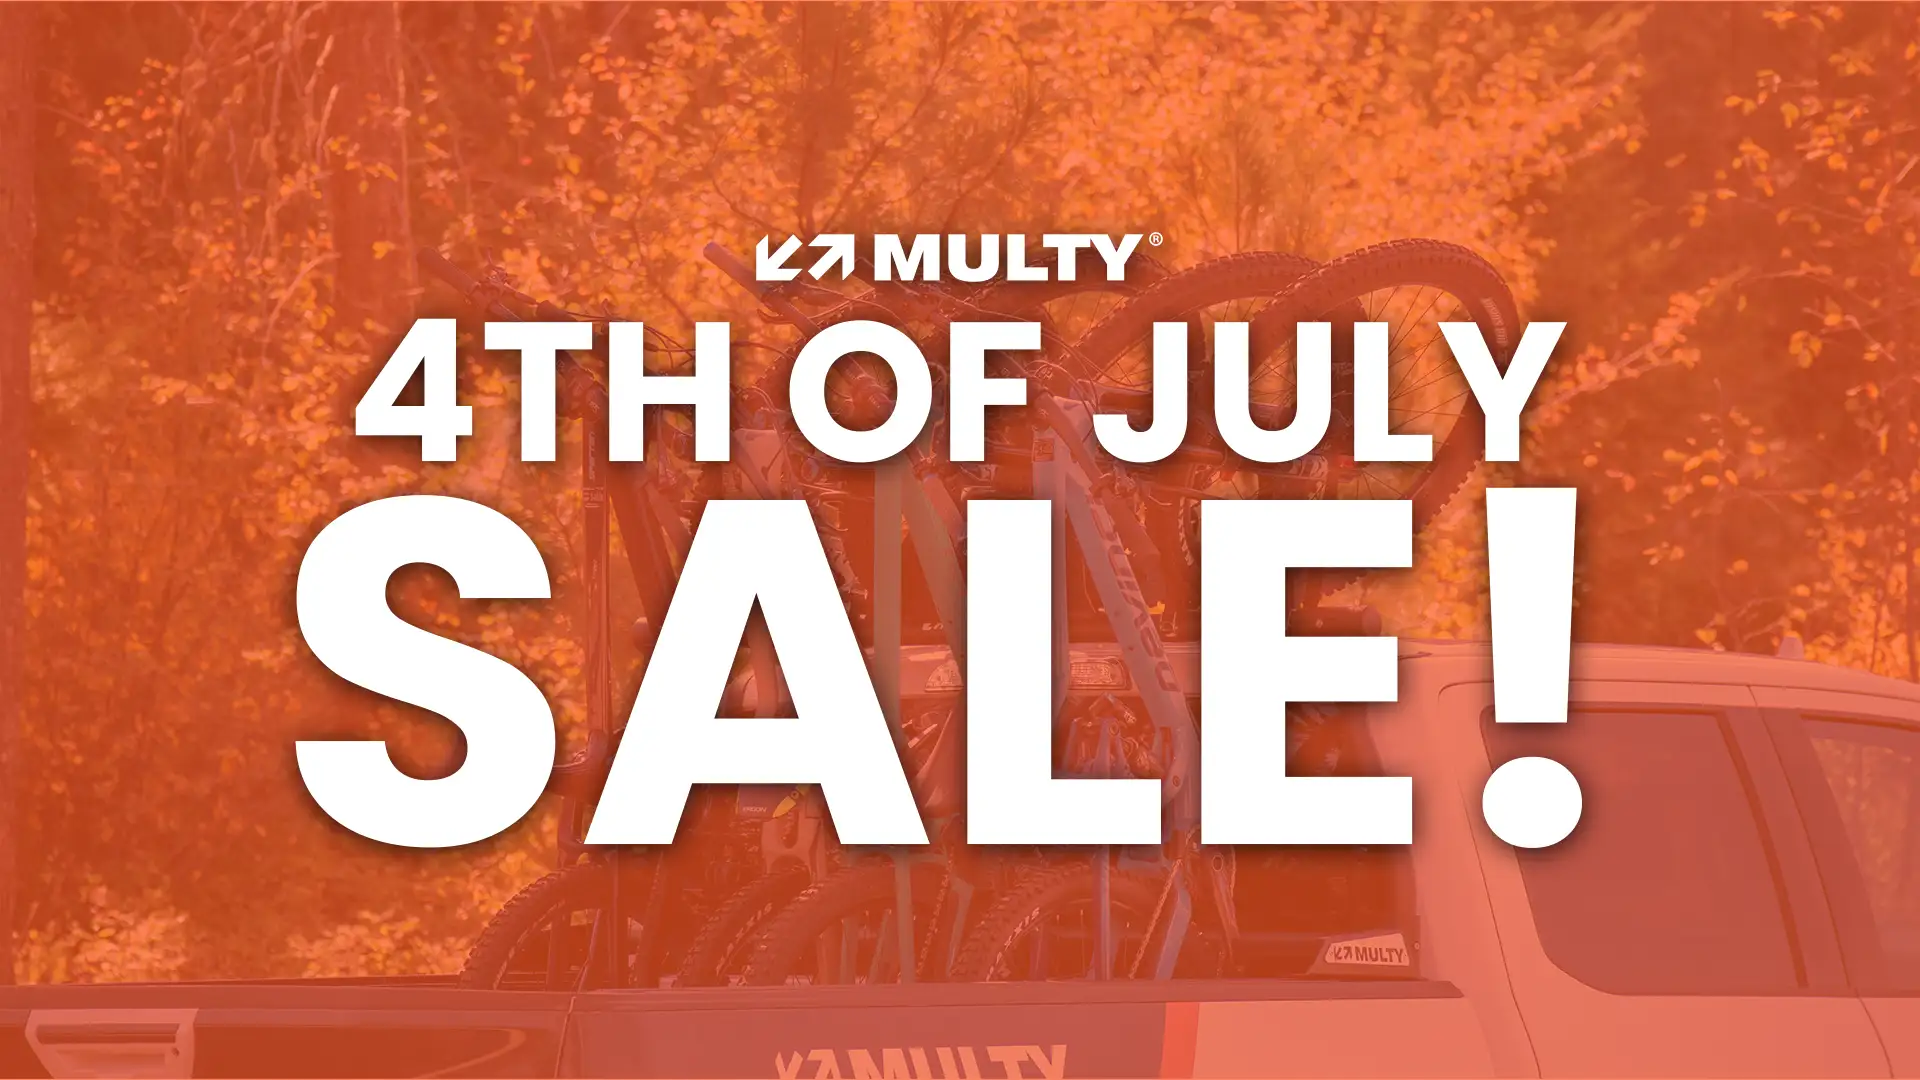 MULTY® Spectacular 4th of July Sale!